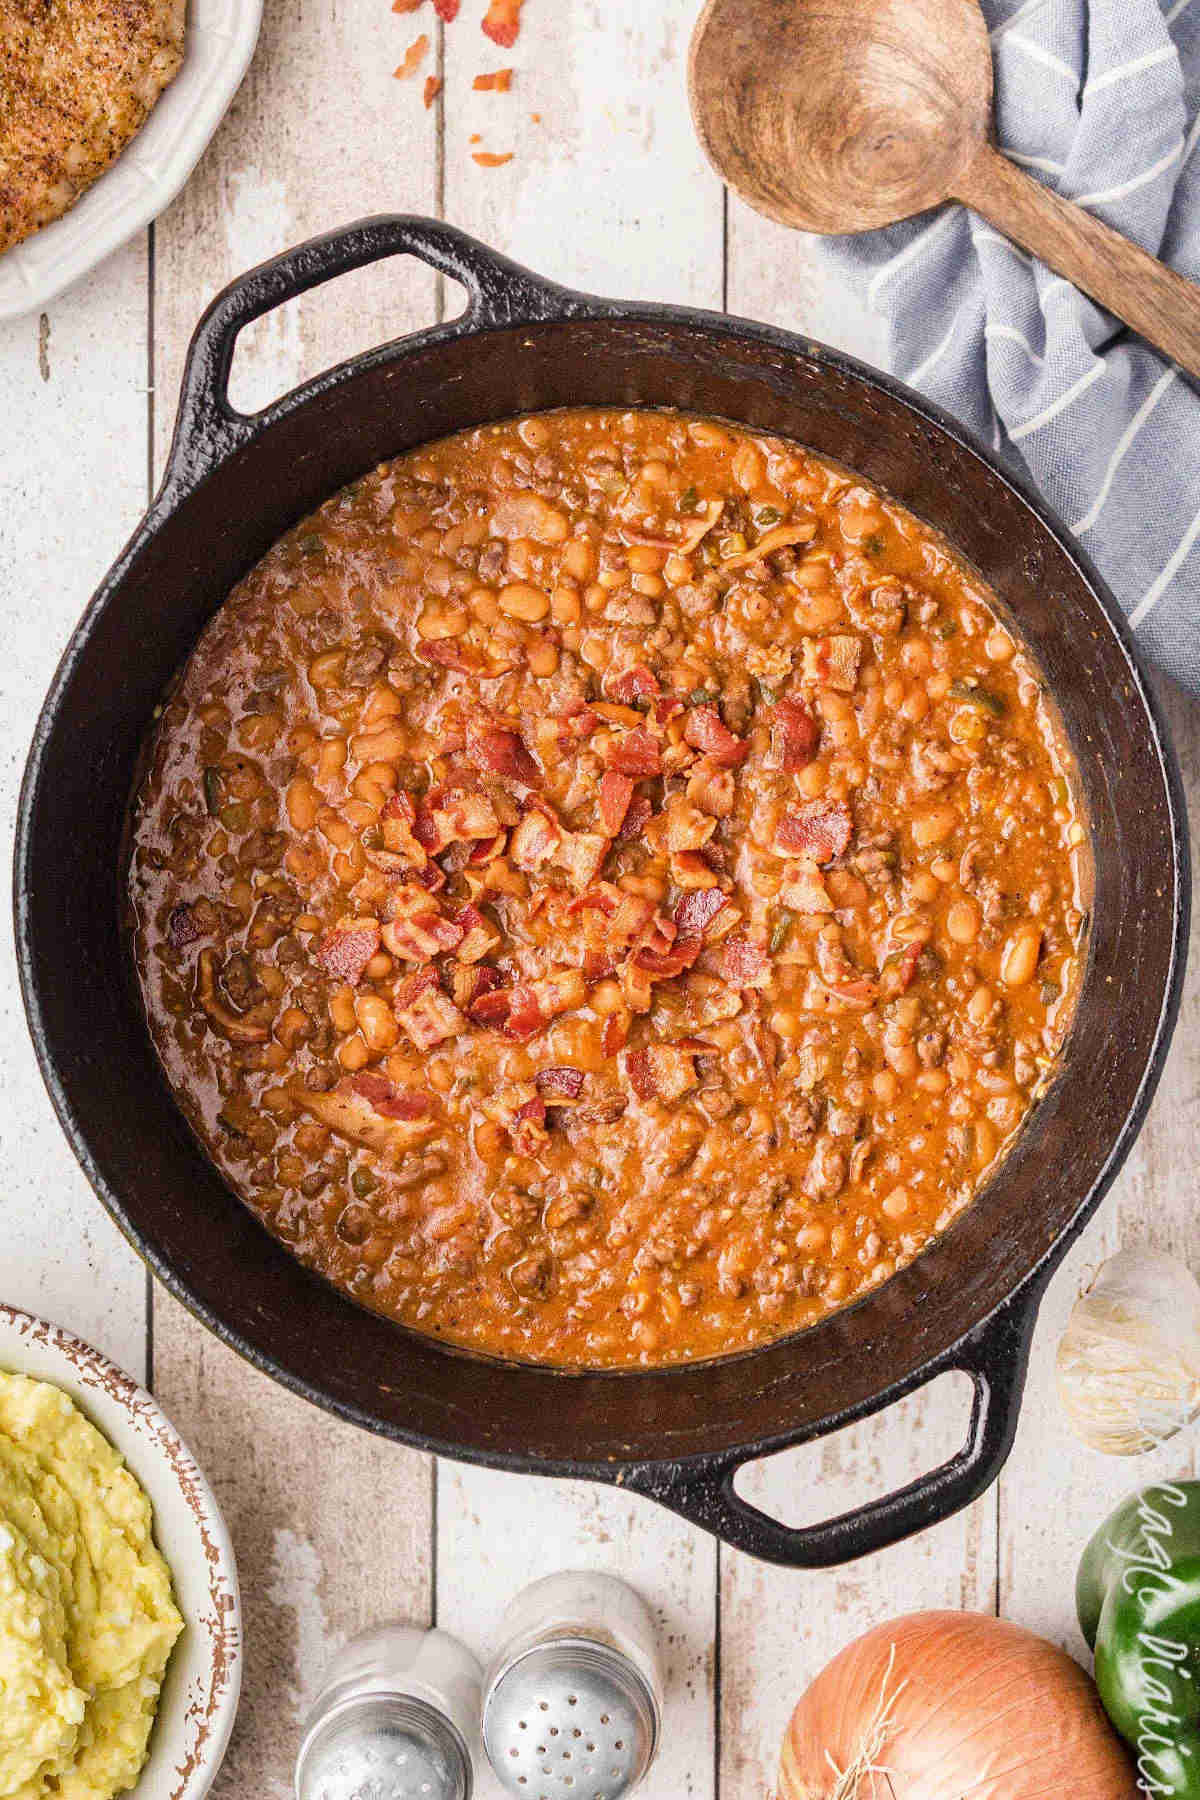 Baked beans in a skillet on a wooden benchtop.